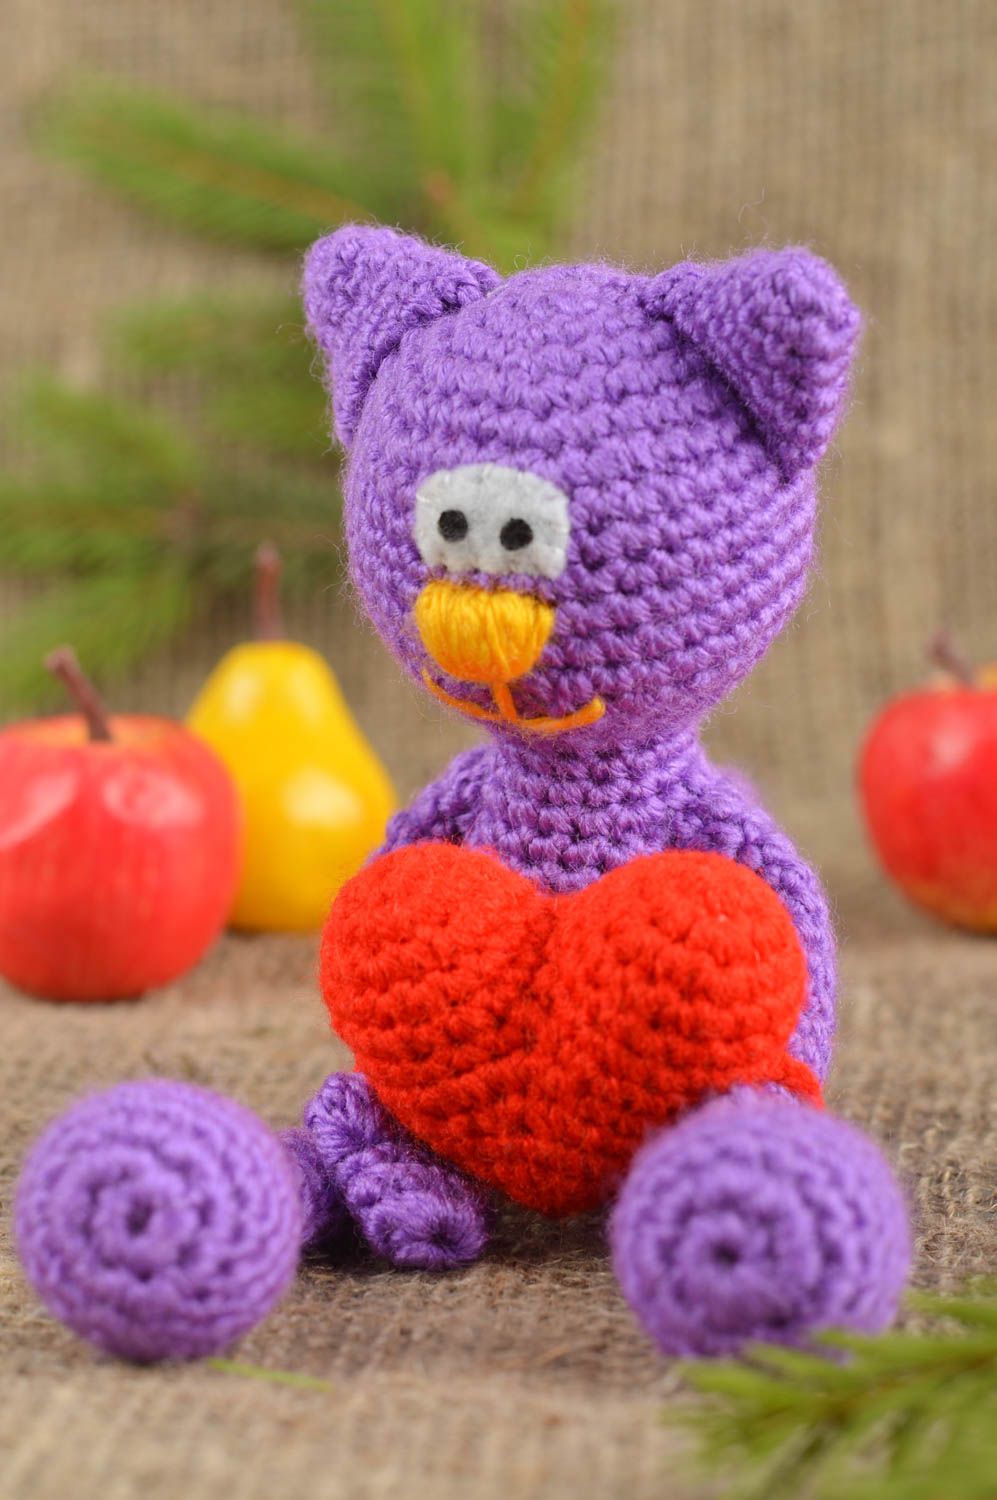 Handmade soft toy violet cat toy baby toys best gifts for kids nursery decor photo 1